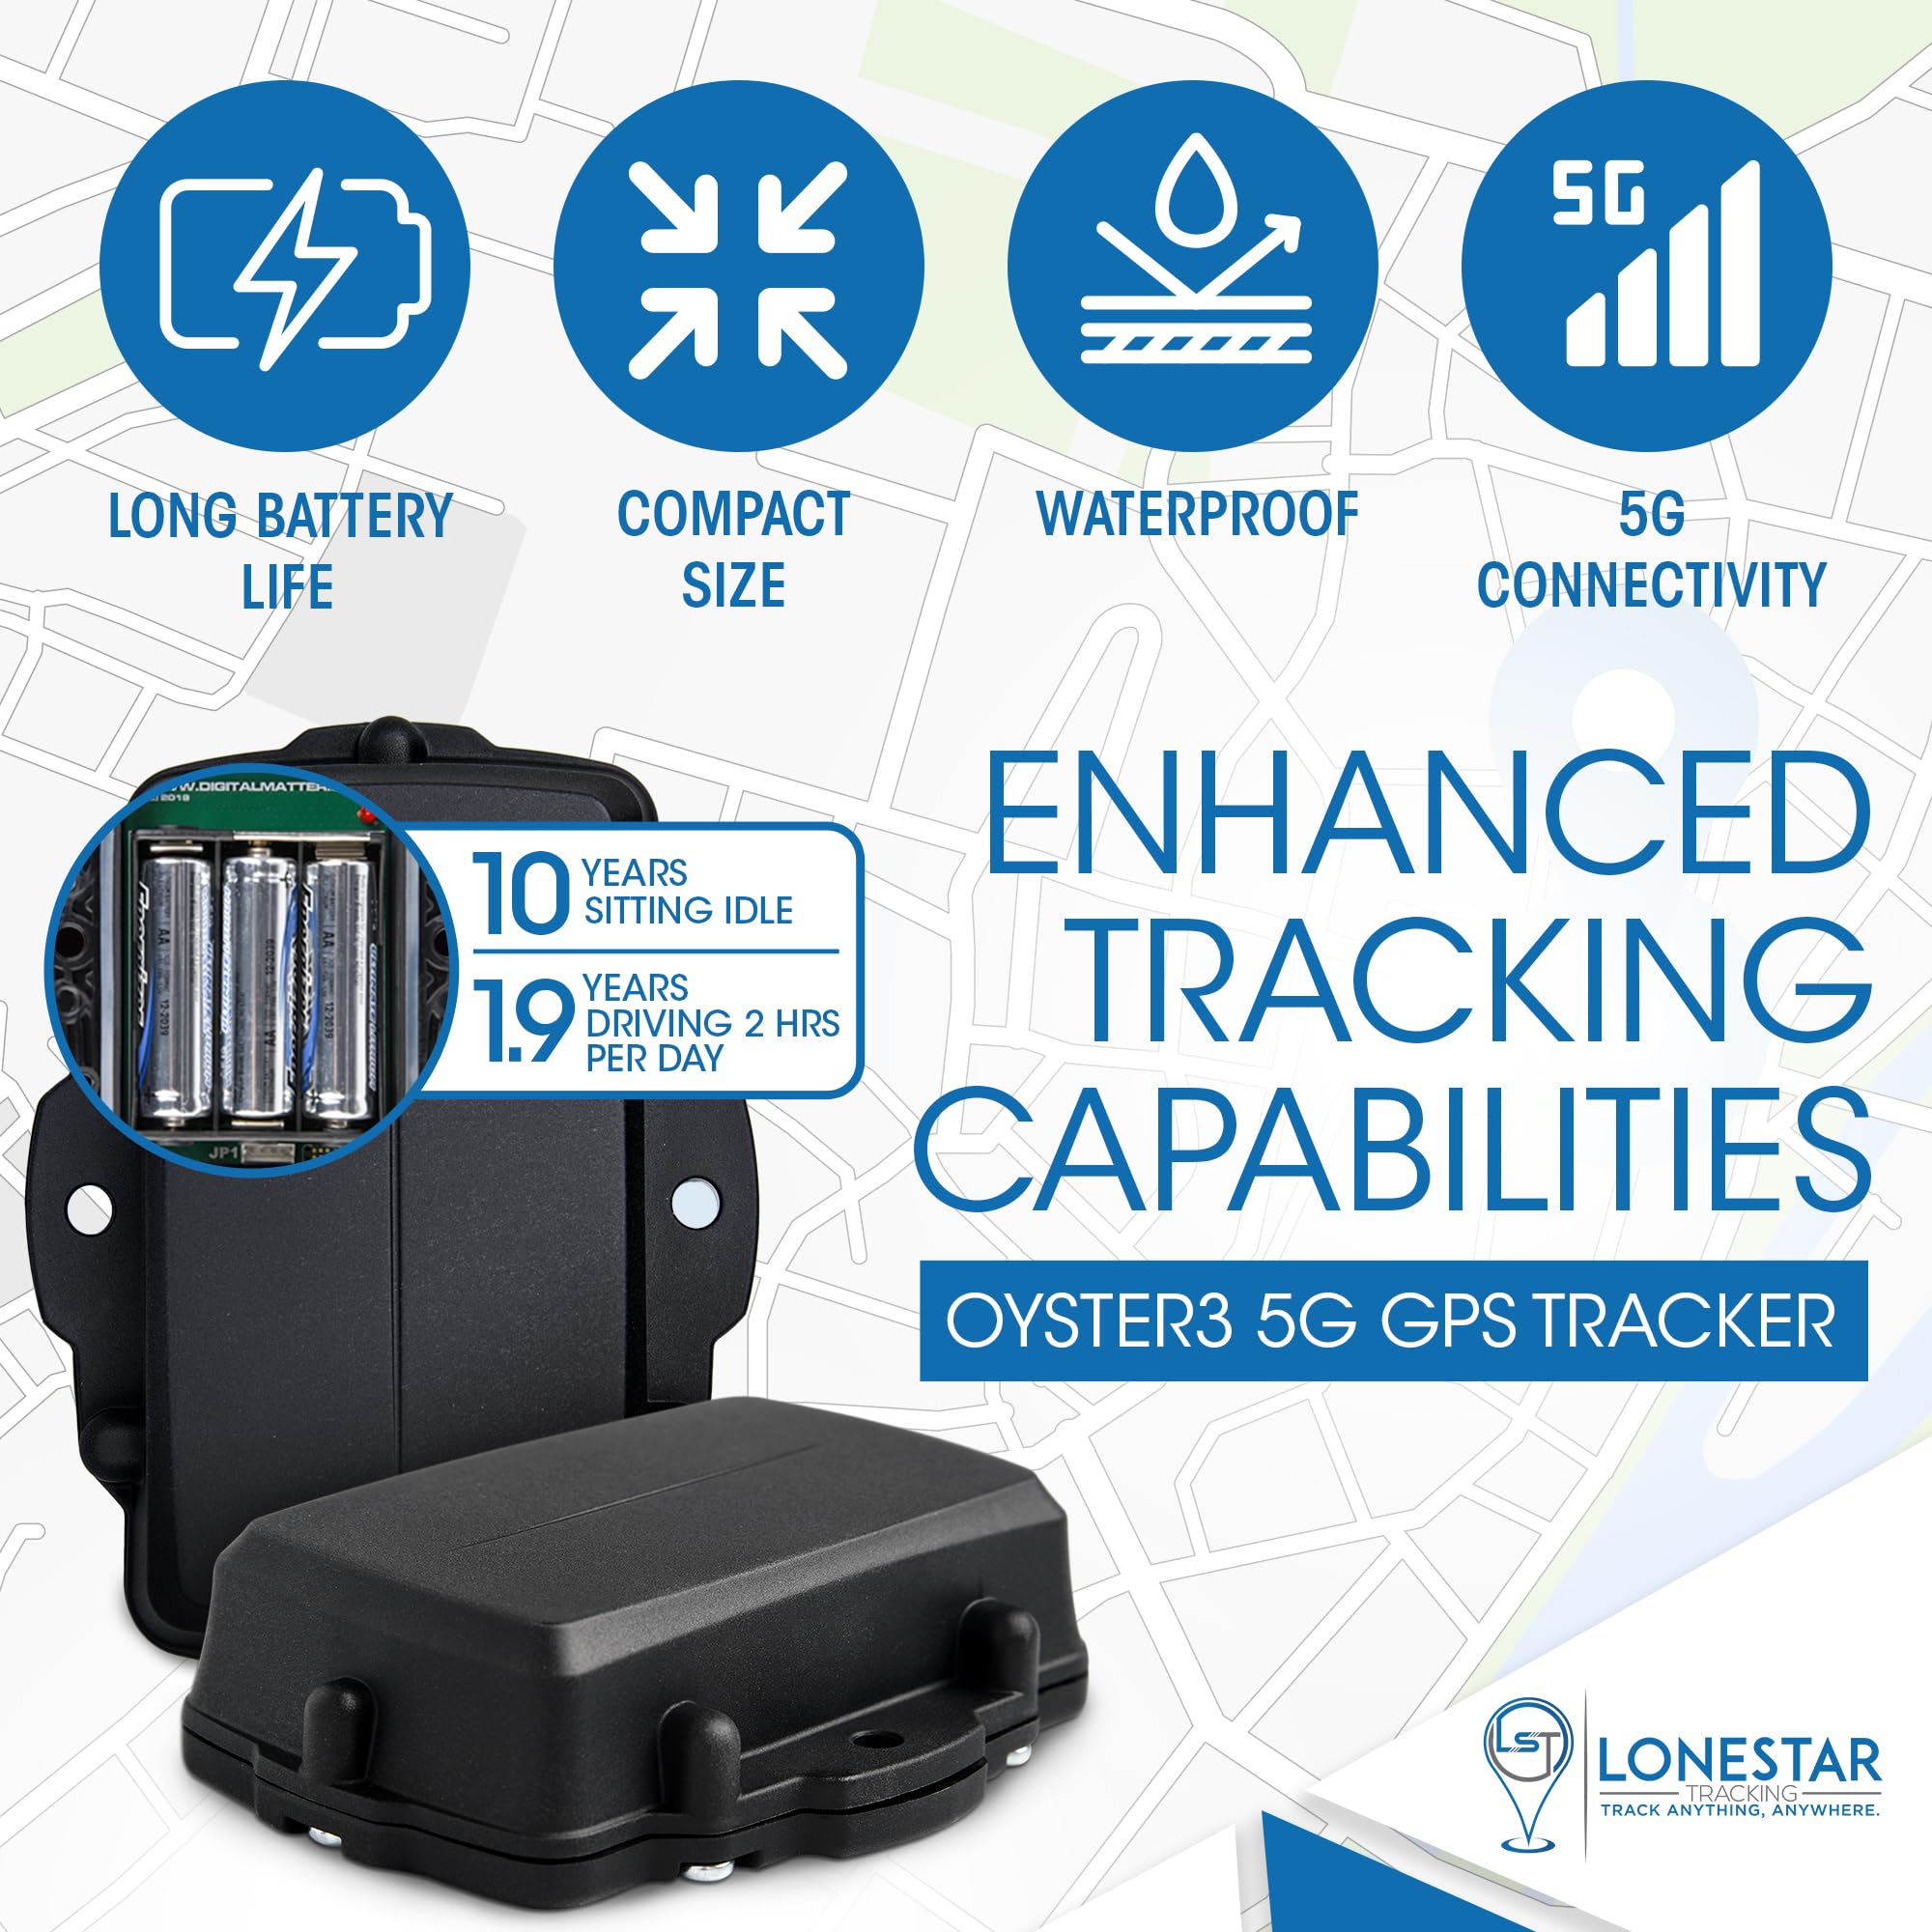 LoneStar Tracking Oyster3 5G GPS Tracker for Assets - Up to 10 Year Battery - Small, Waterproof GPS for Asset Tracking - Car Tracker Device - GPS Vehicle/Trailer/Tracker (Subscription Required)